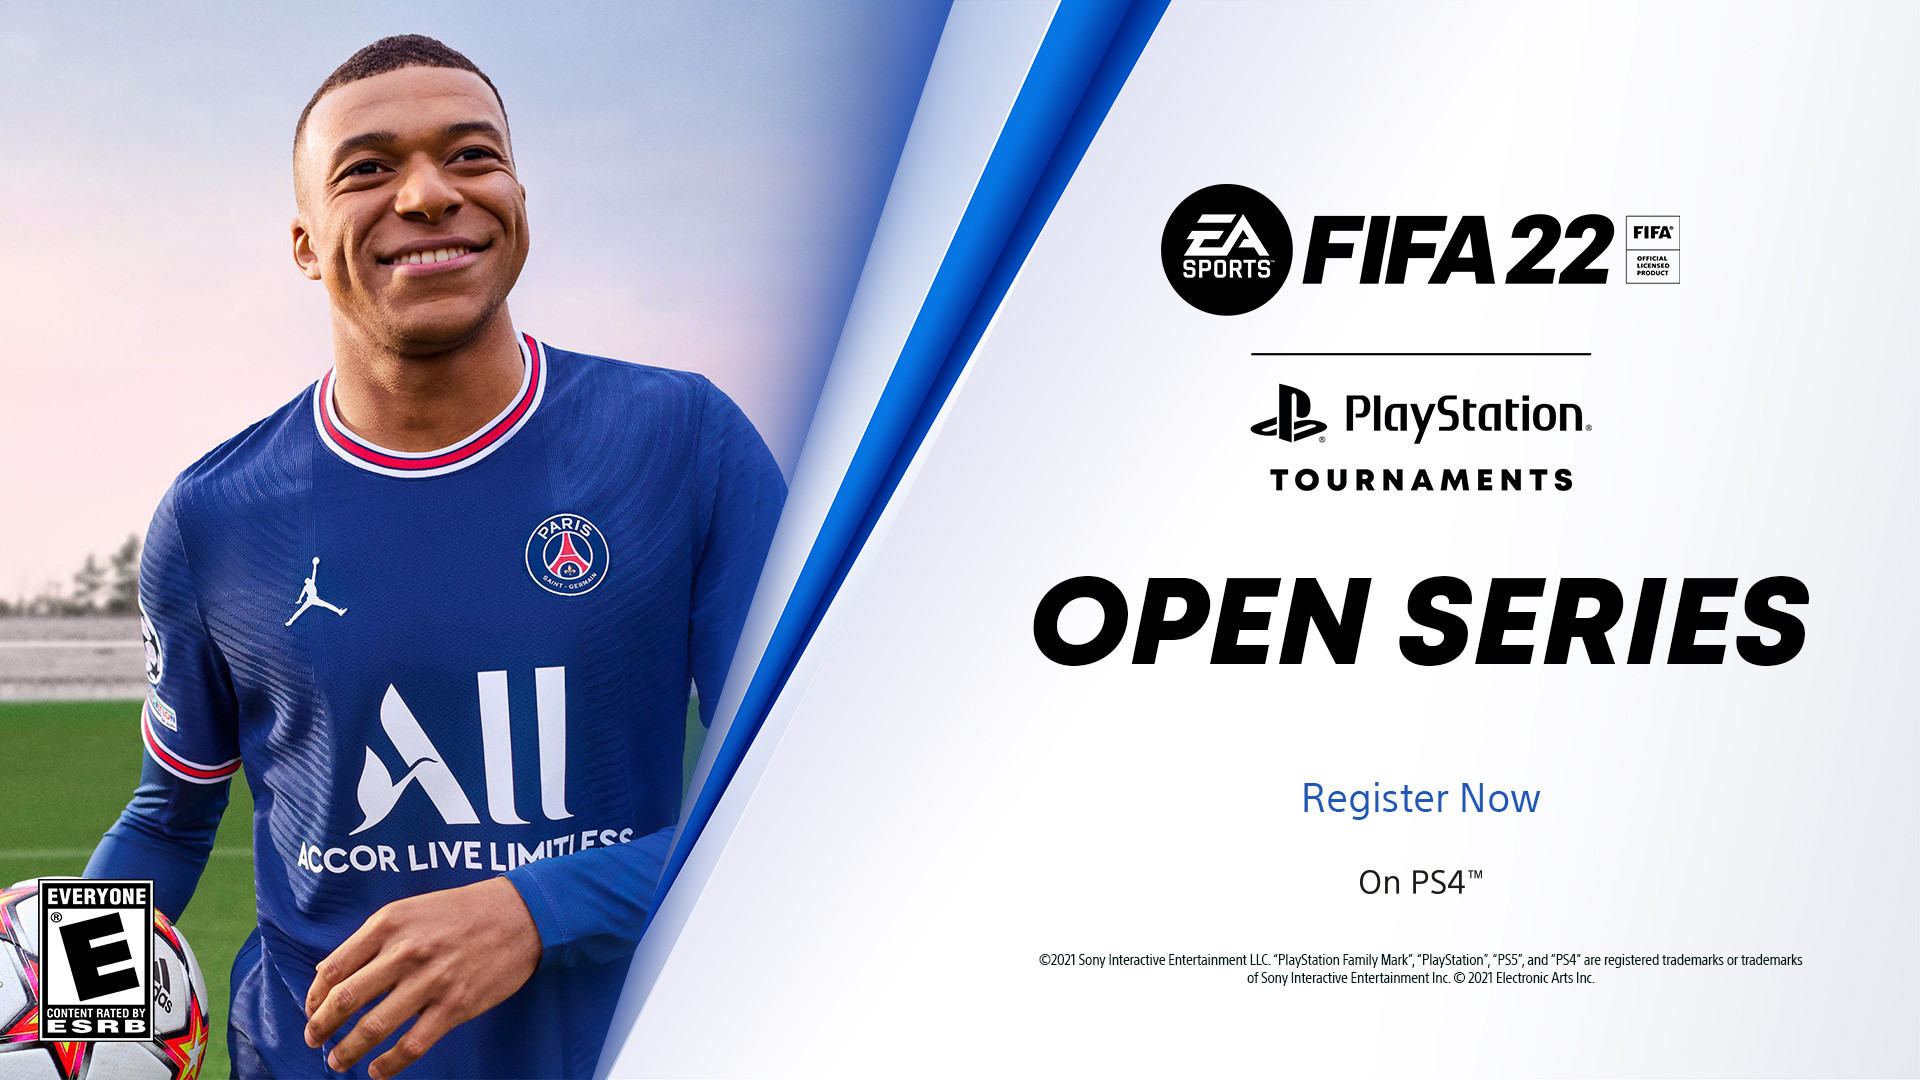 FIFA 22 CLUB PlayStation Tournaments, Open Series